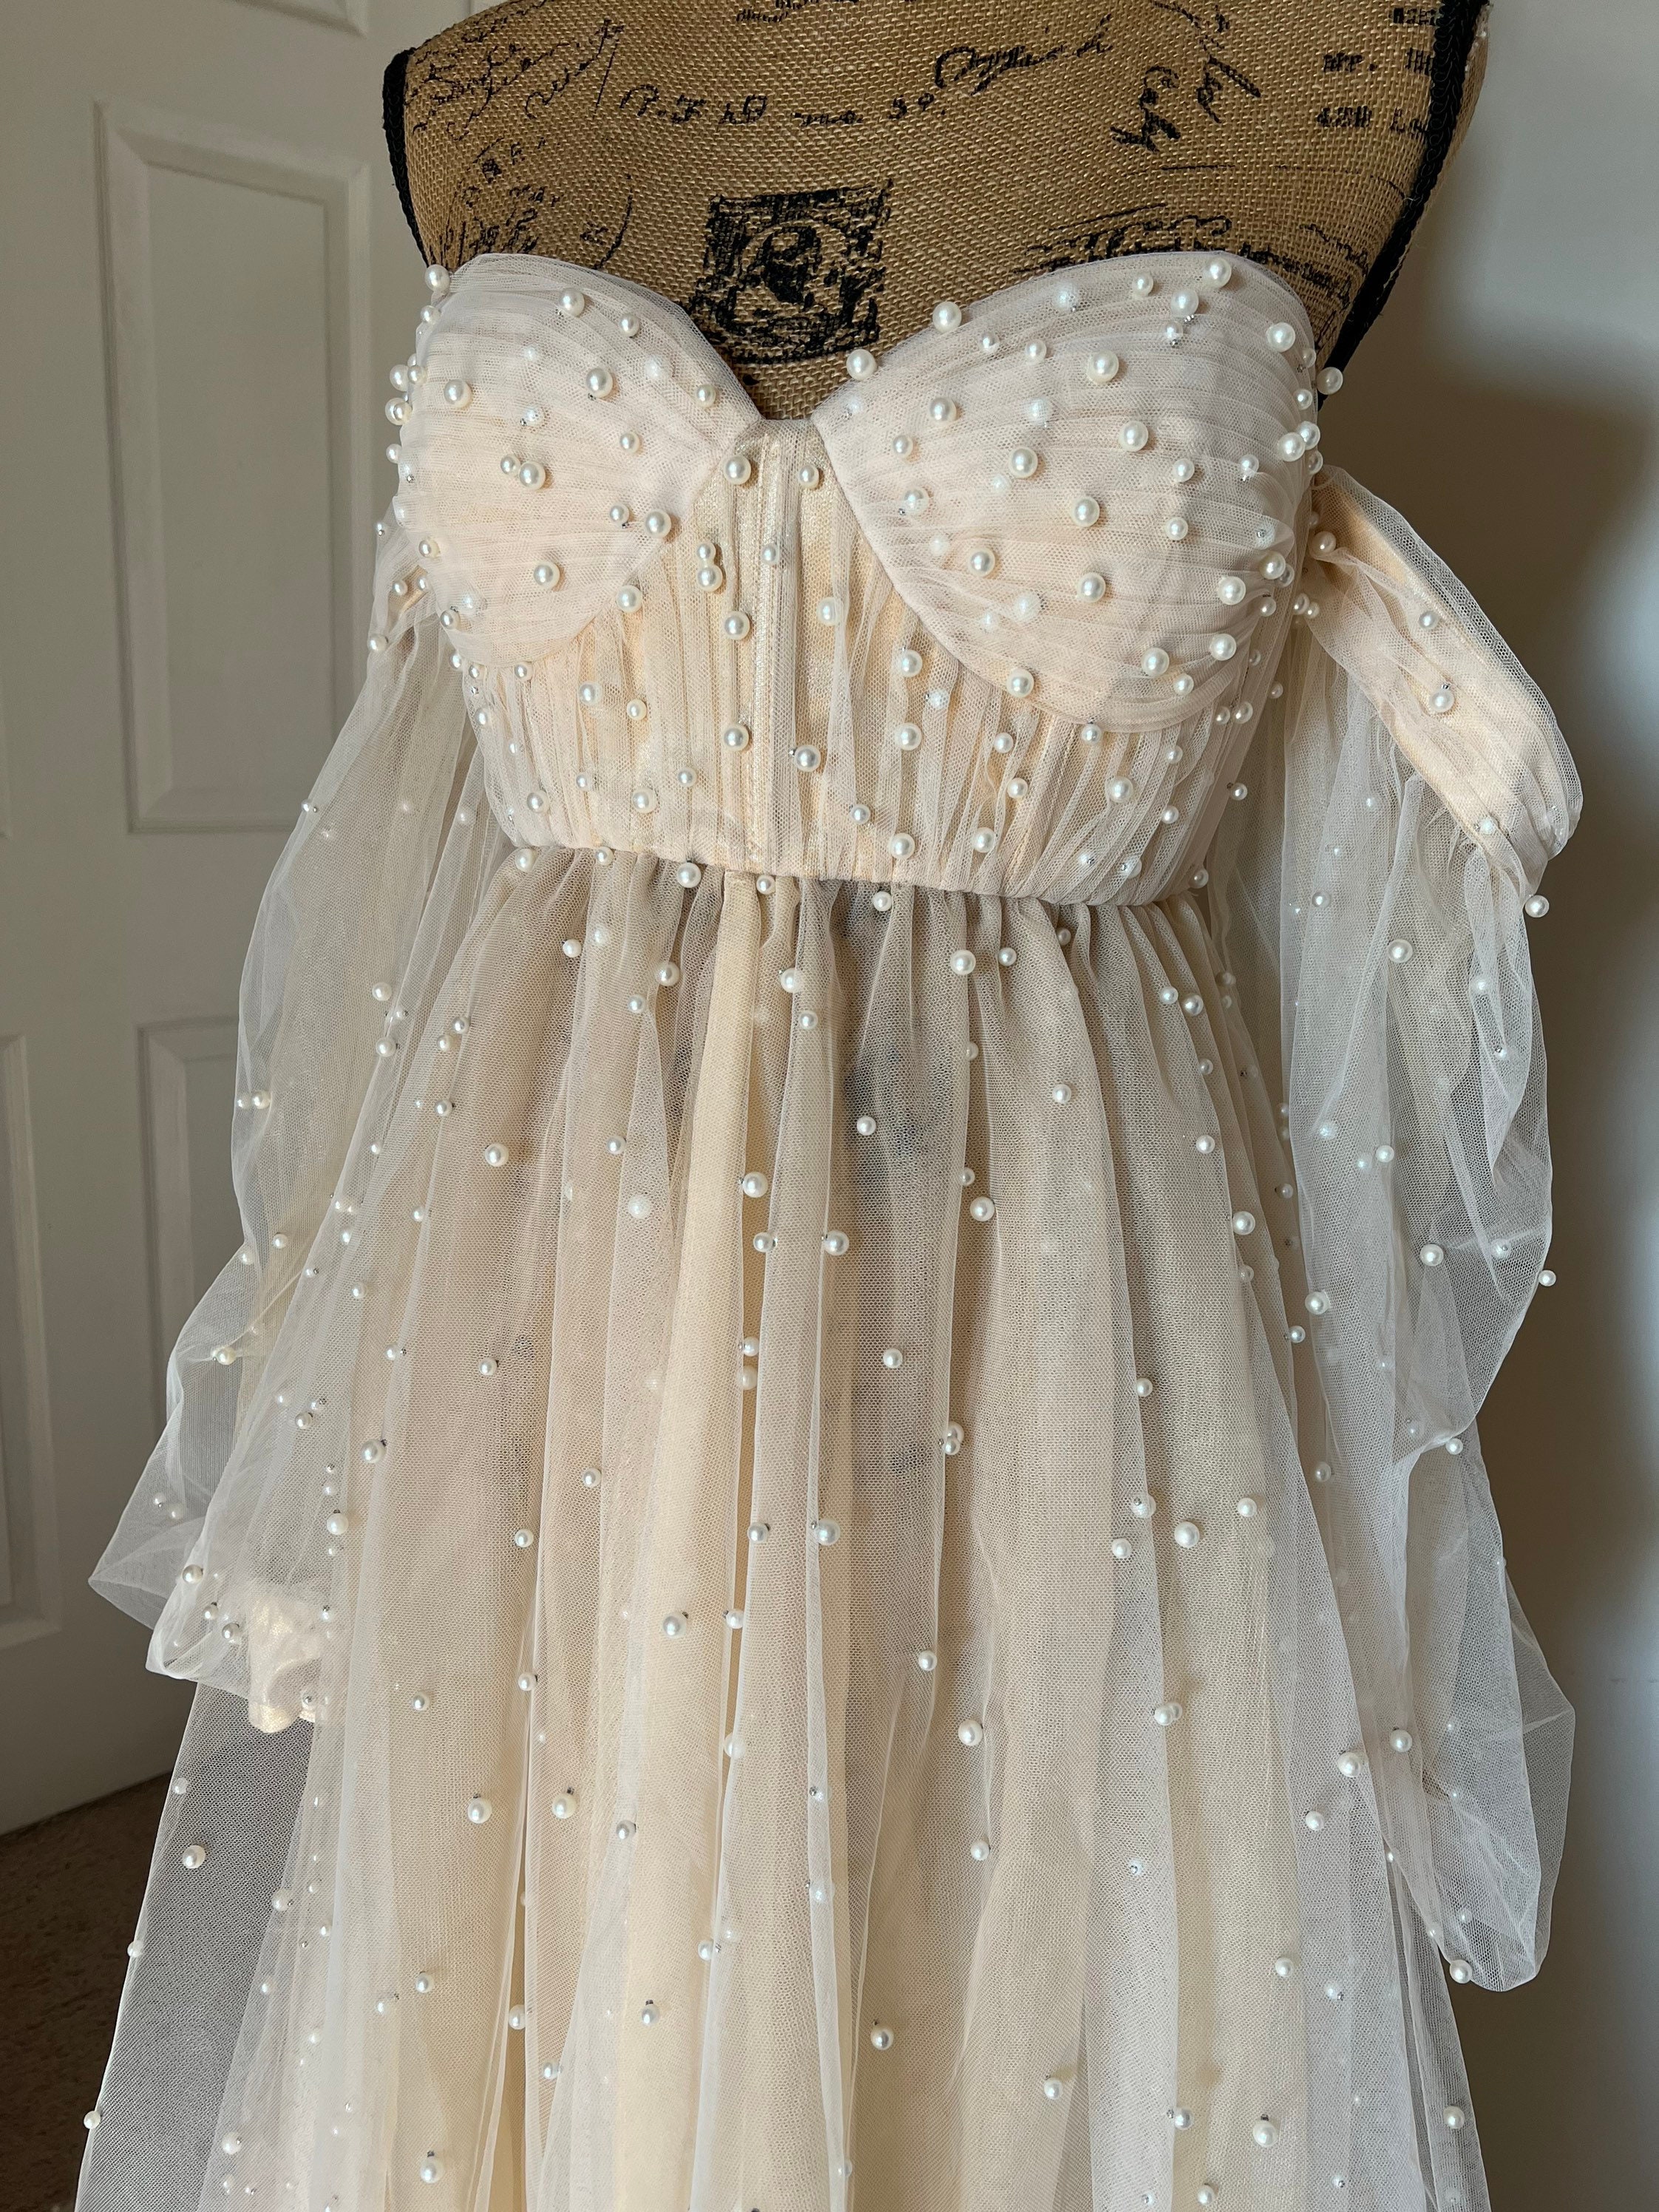 Maternity Dresses Lace Maternity Pography Dress Clothes For Pregnant Women  Wedding Maternity Gown Po Shoot Boho Style Accessories 230516 From Lian08,  $150.94